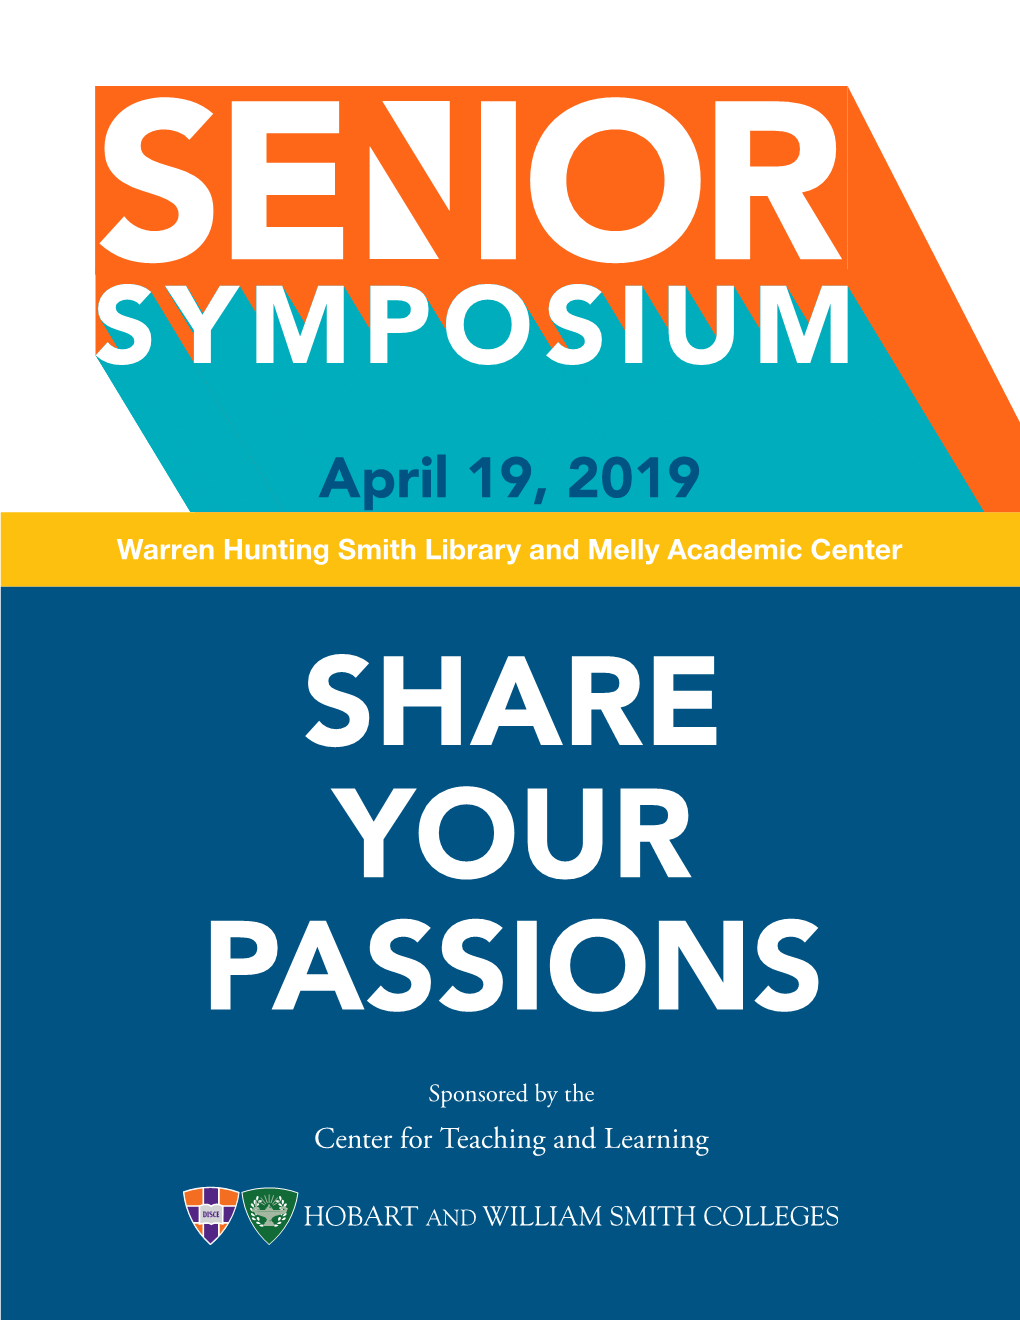 April 19, 2019 Warren Hunting Smith Library and Melly Academic Center SHARE YOUR PASSIONS Sponsored by the Center for Teaching and Learning